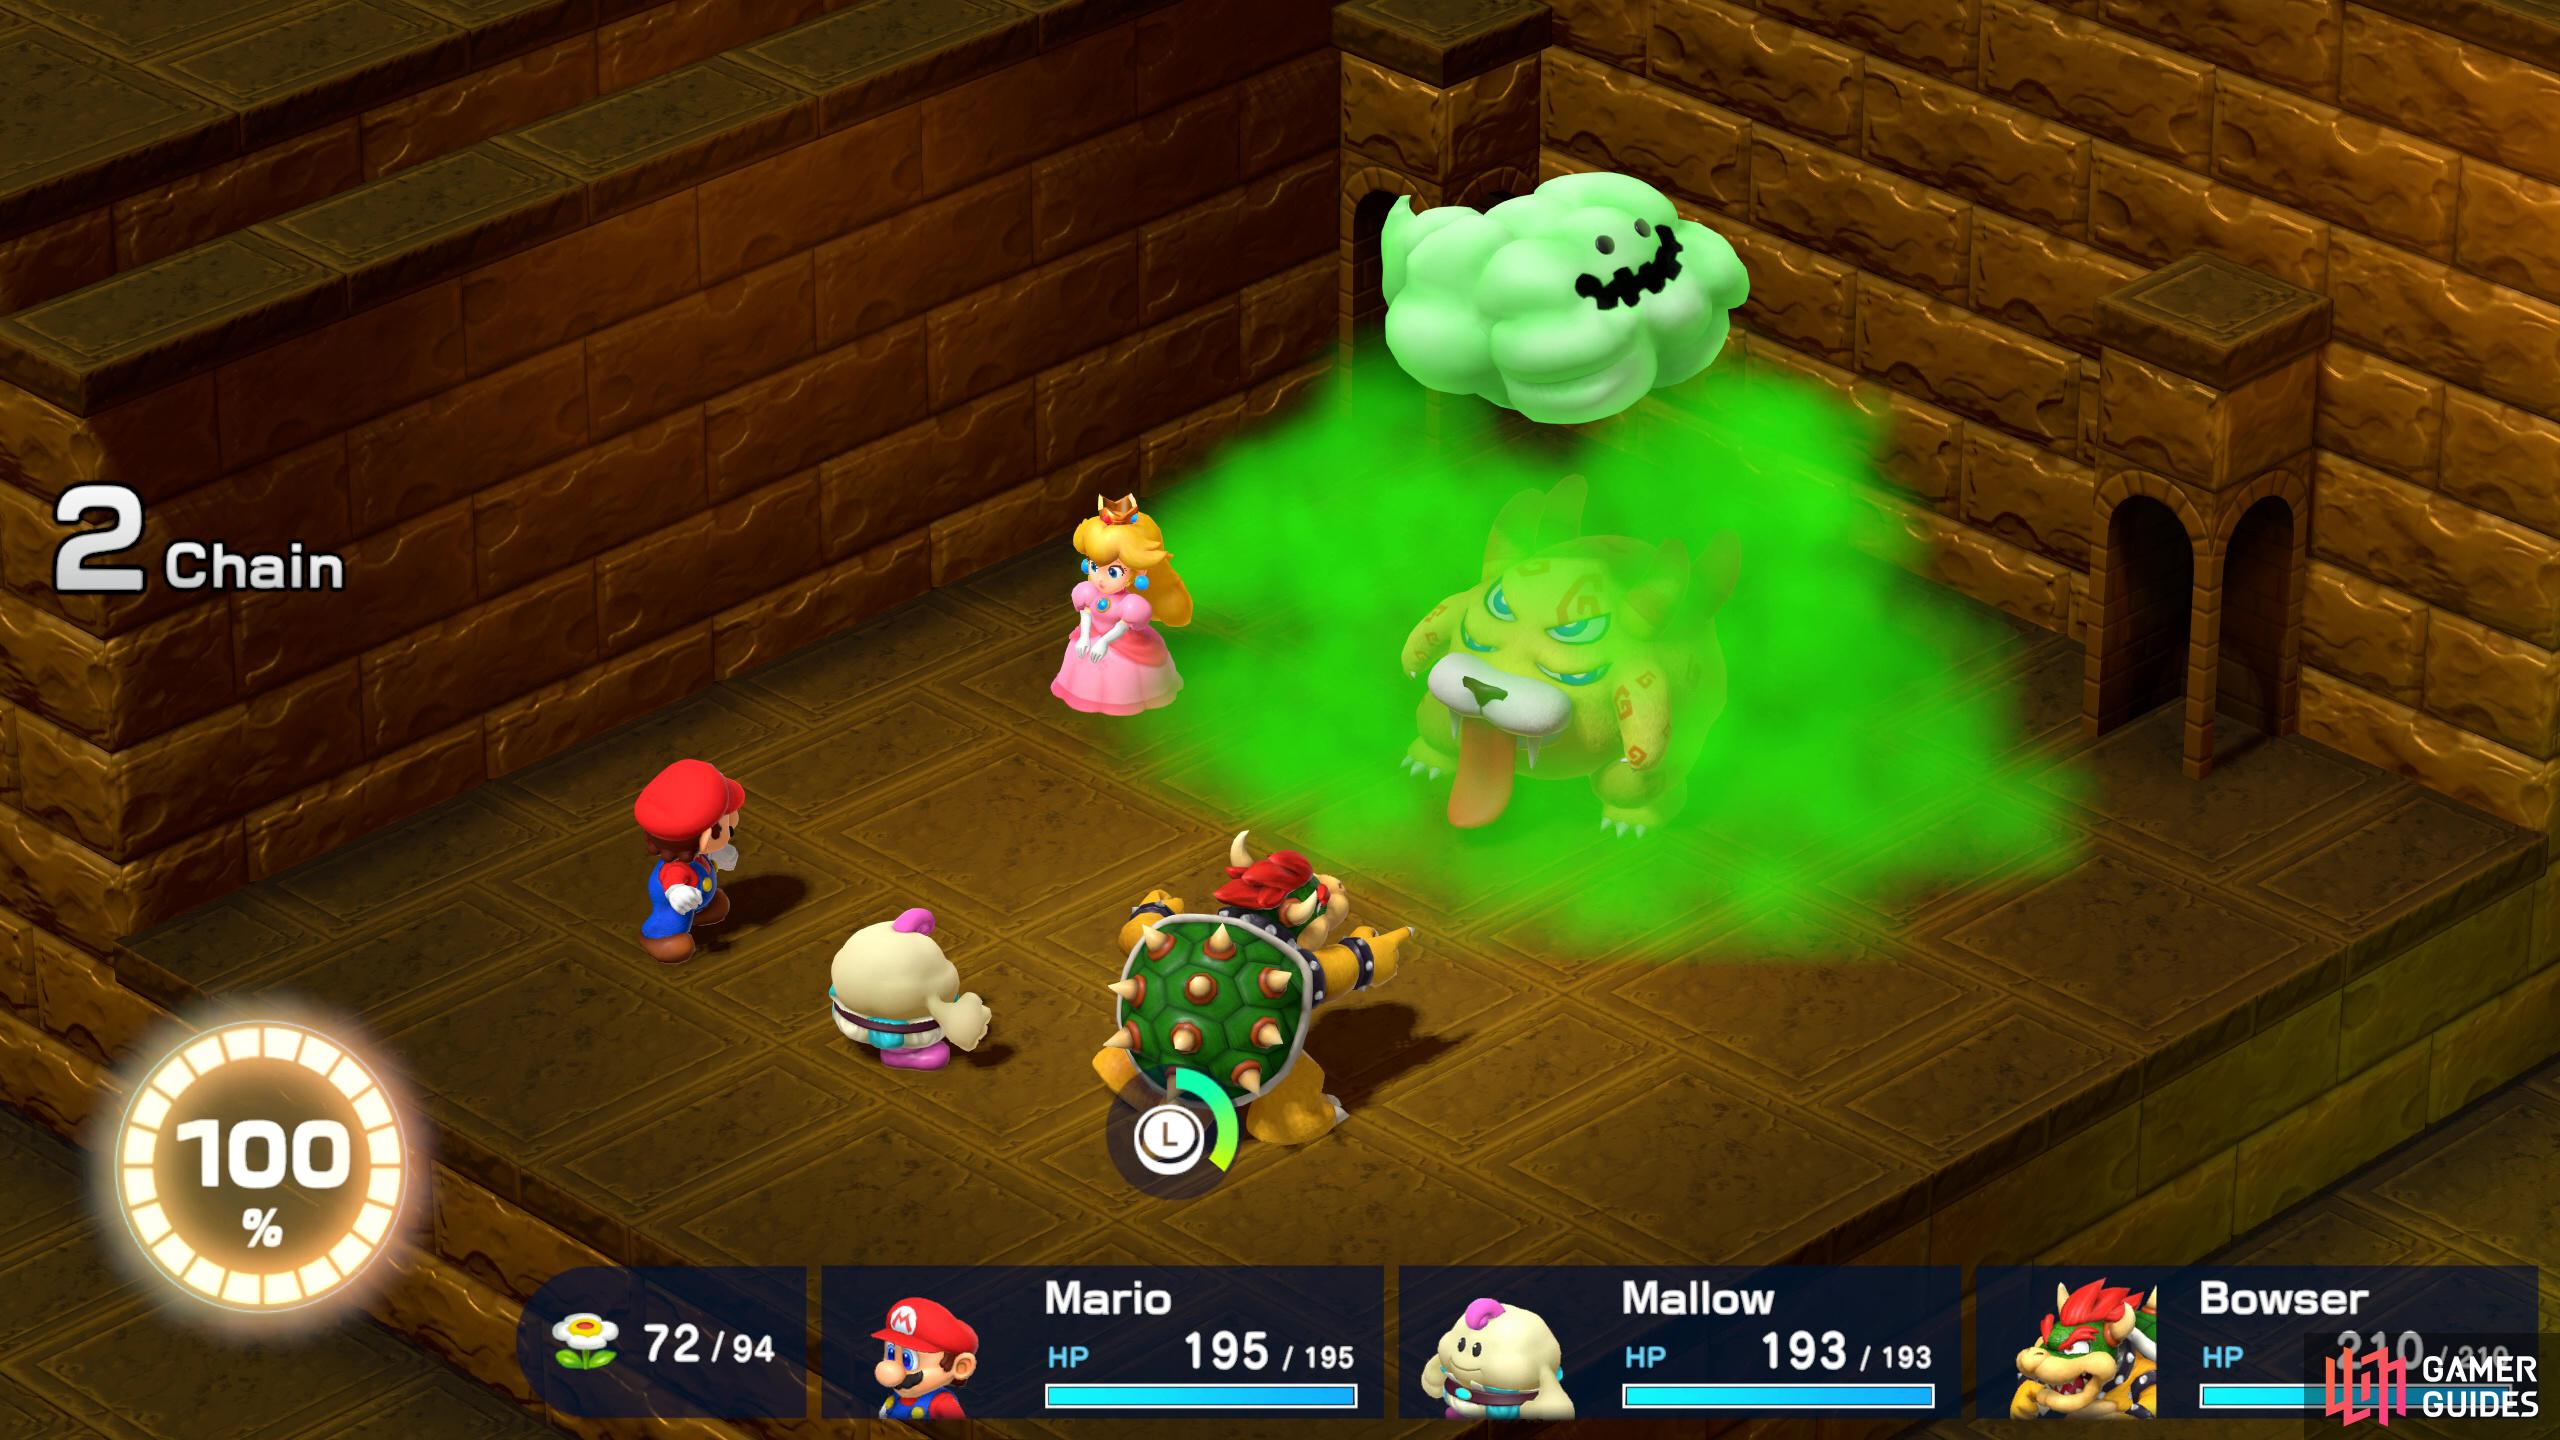 Bowser's Poison Gas is really strong against Belome, and should be reapplied throughout the battle.